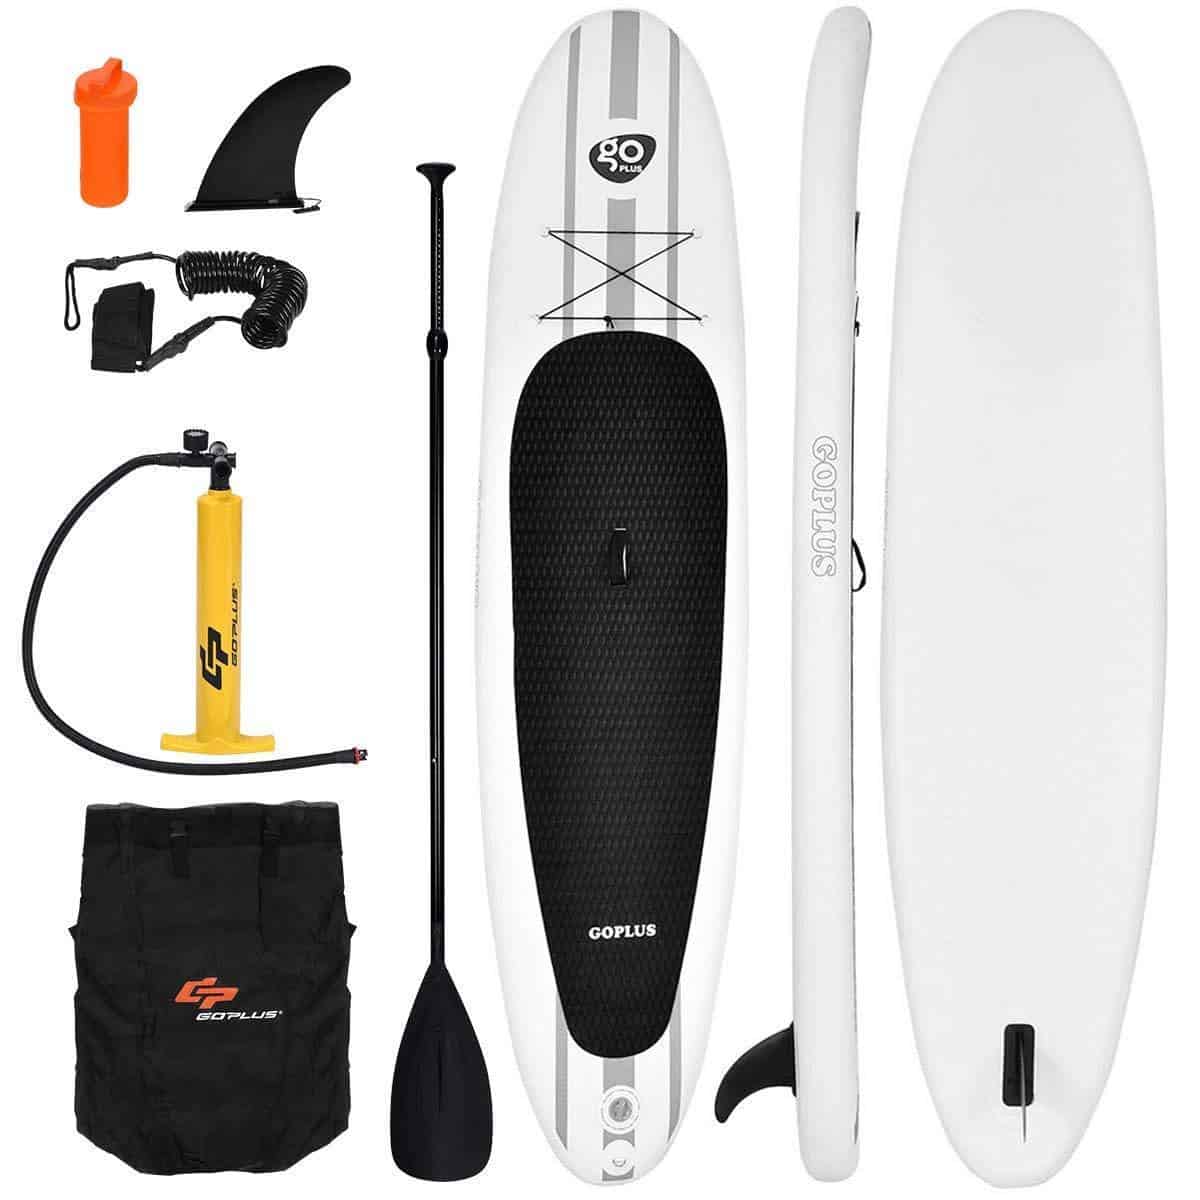 Goplus 10ft Inflatable Paddle Board Review